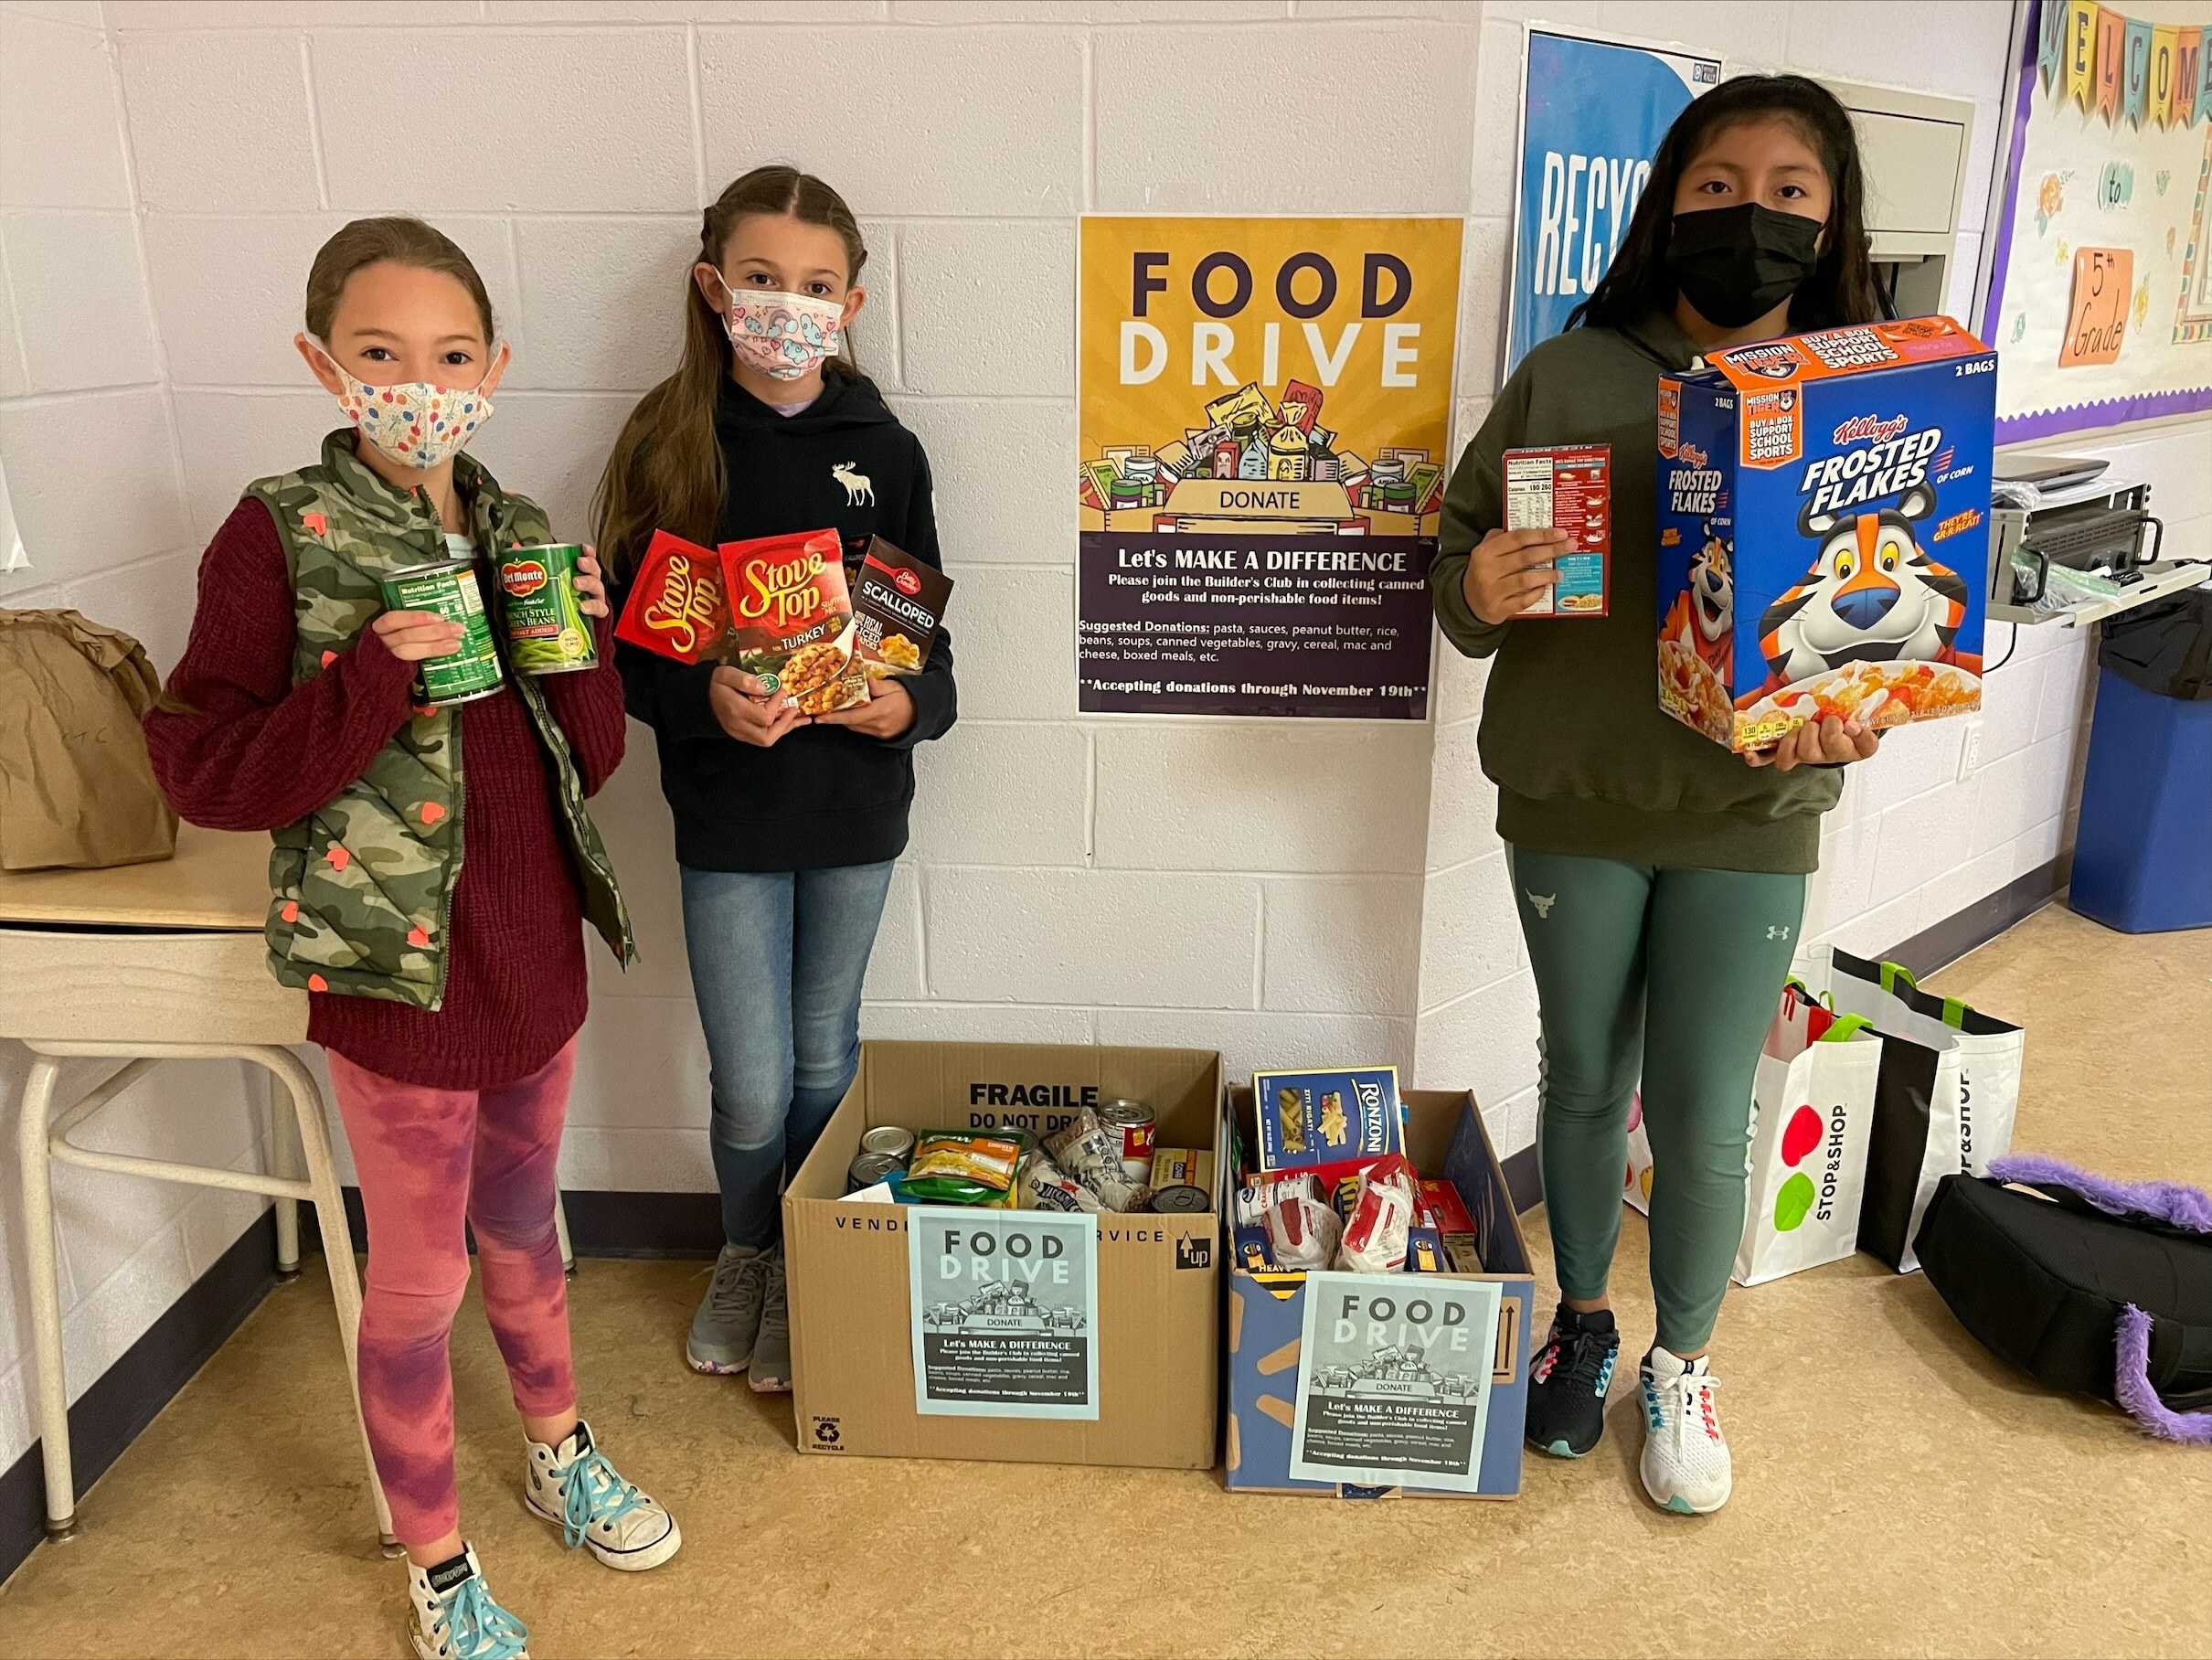 To give back to their community, members of the Hampton Bays Middle School Builders Club worked to collect nonperishable goods for neighbors in need during the month of November. All items collected were donated to St. Rosalie’s Community Food Pantry.